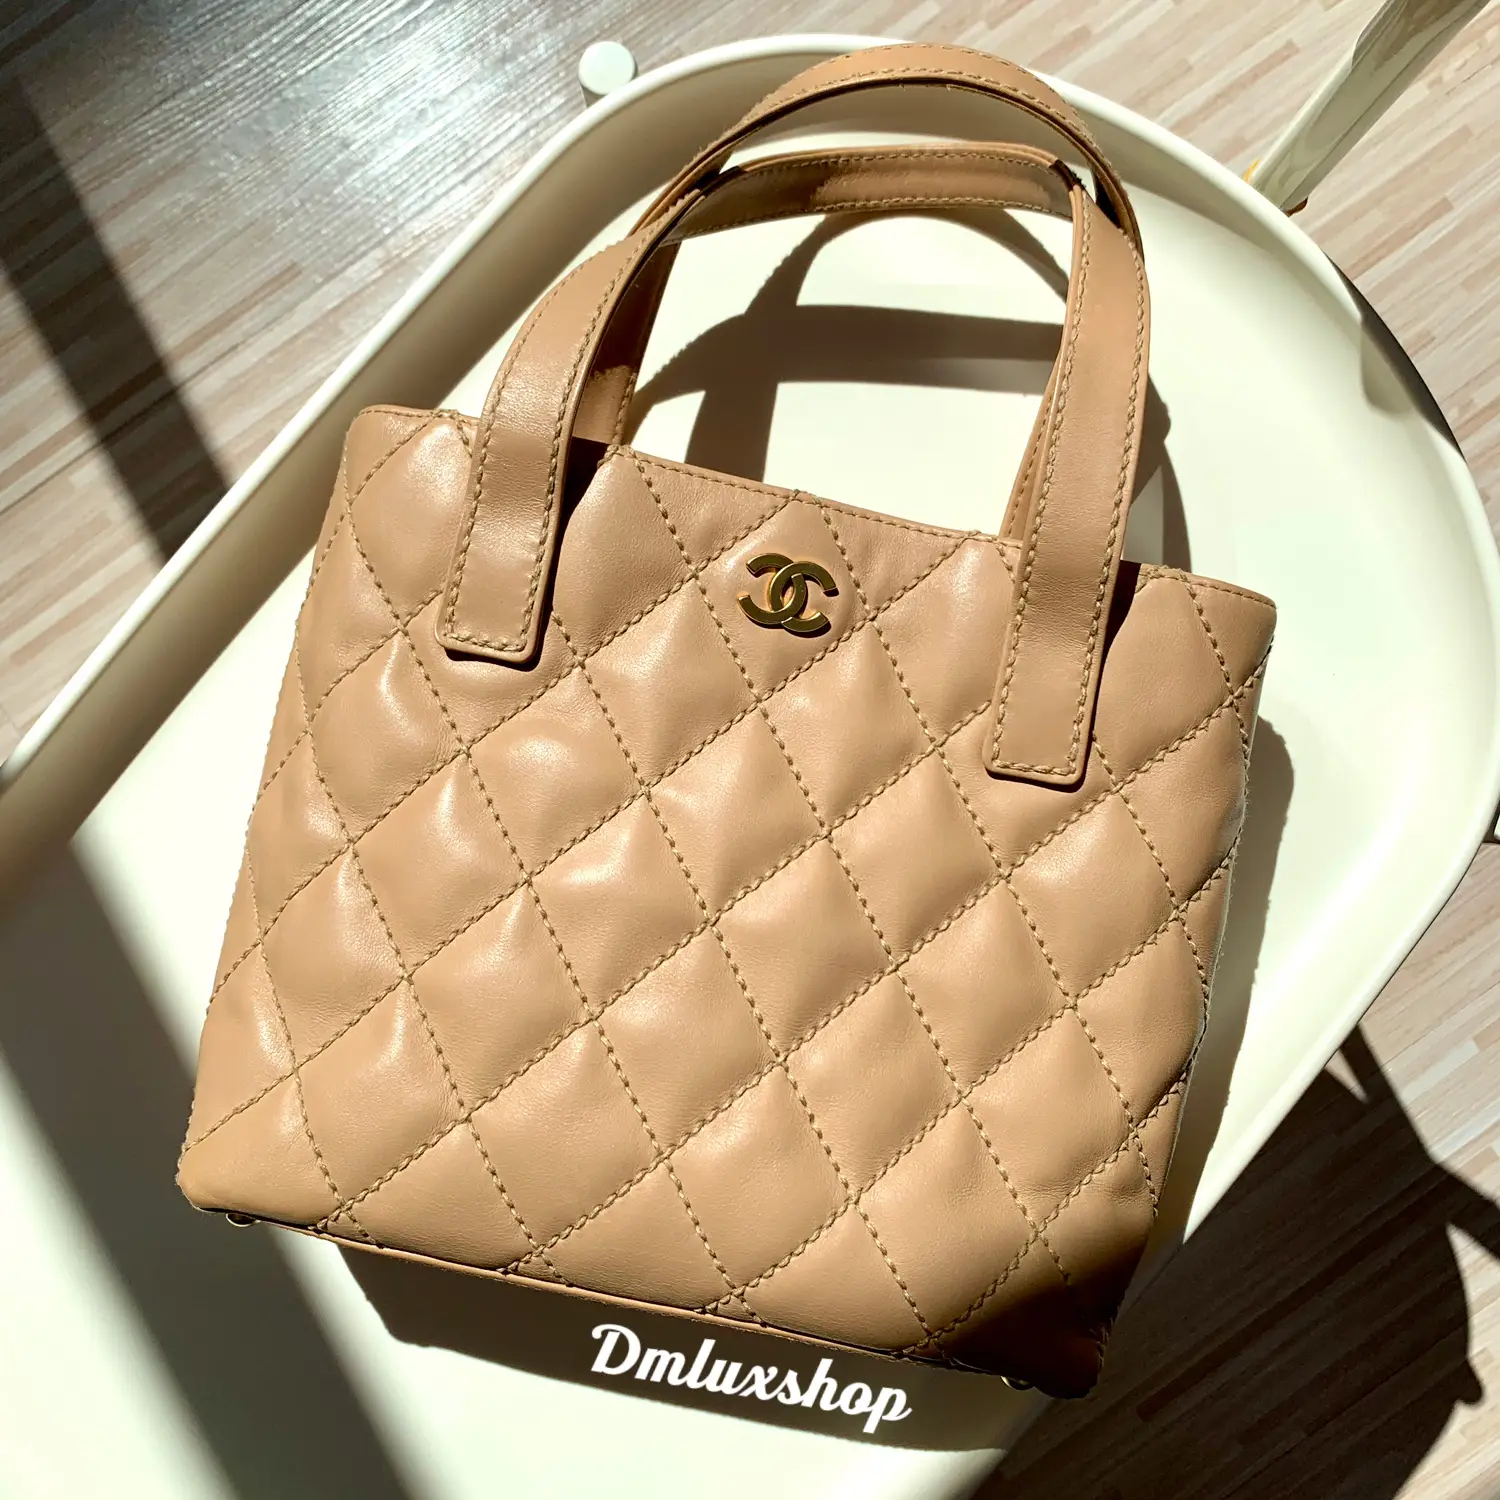 🇲🇾Chanel Beige Wild Stitch Tote🤎, Gallery posted by DM Luxshop